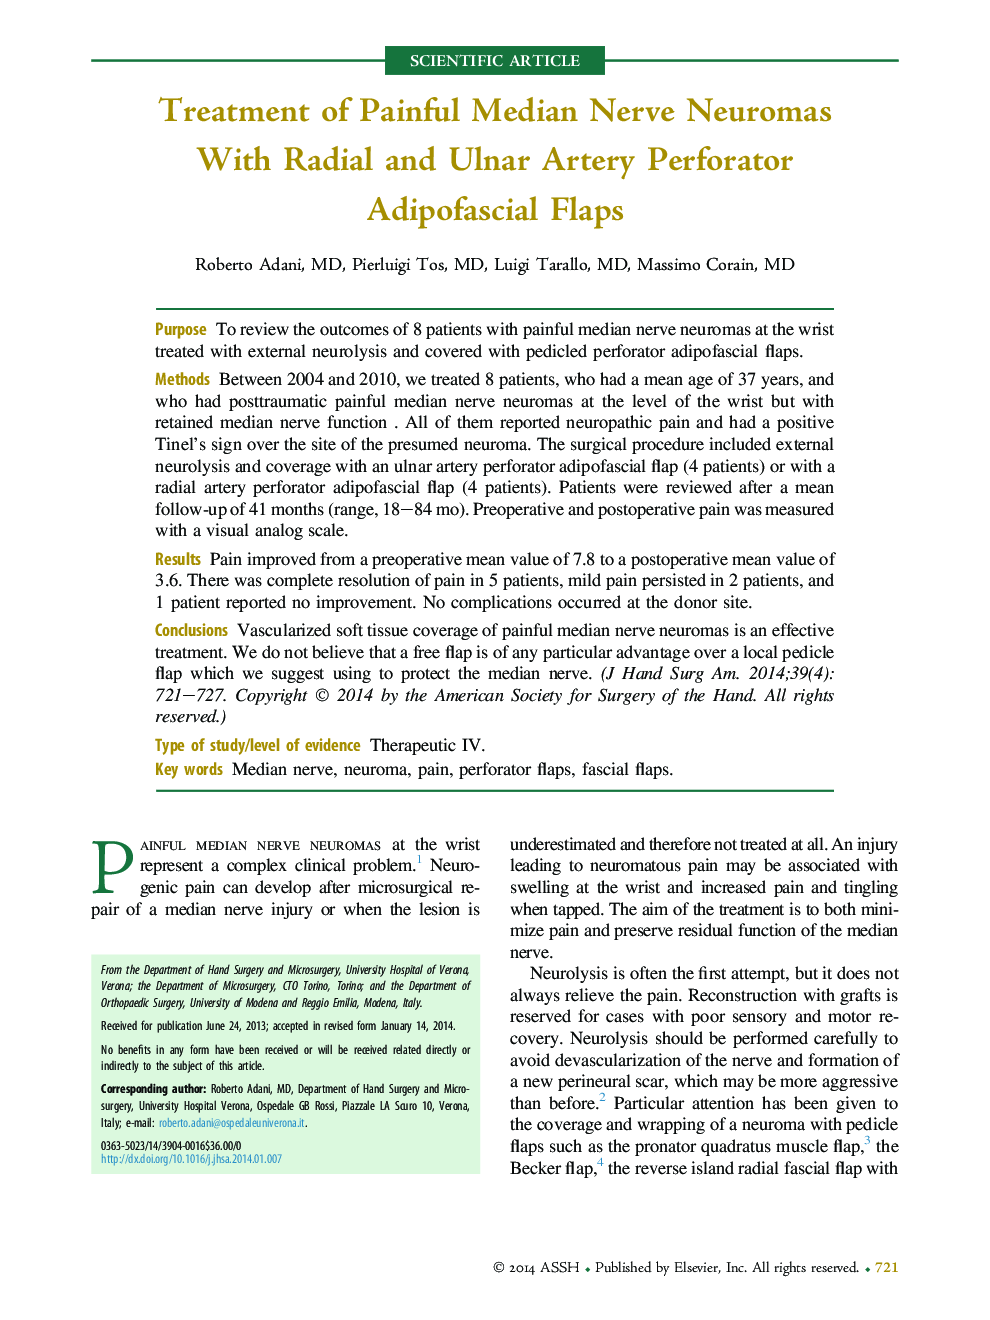 Treatment of Painful Median Nerve Neuromas With Radial and Ulnar Artery Perforator Adipofascial Flaps 